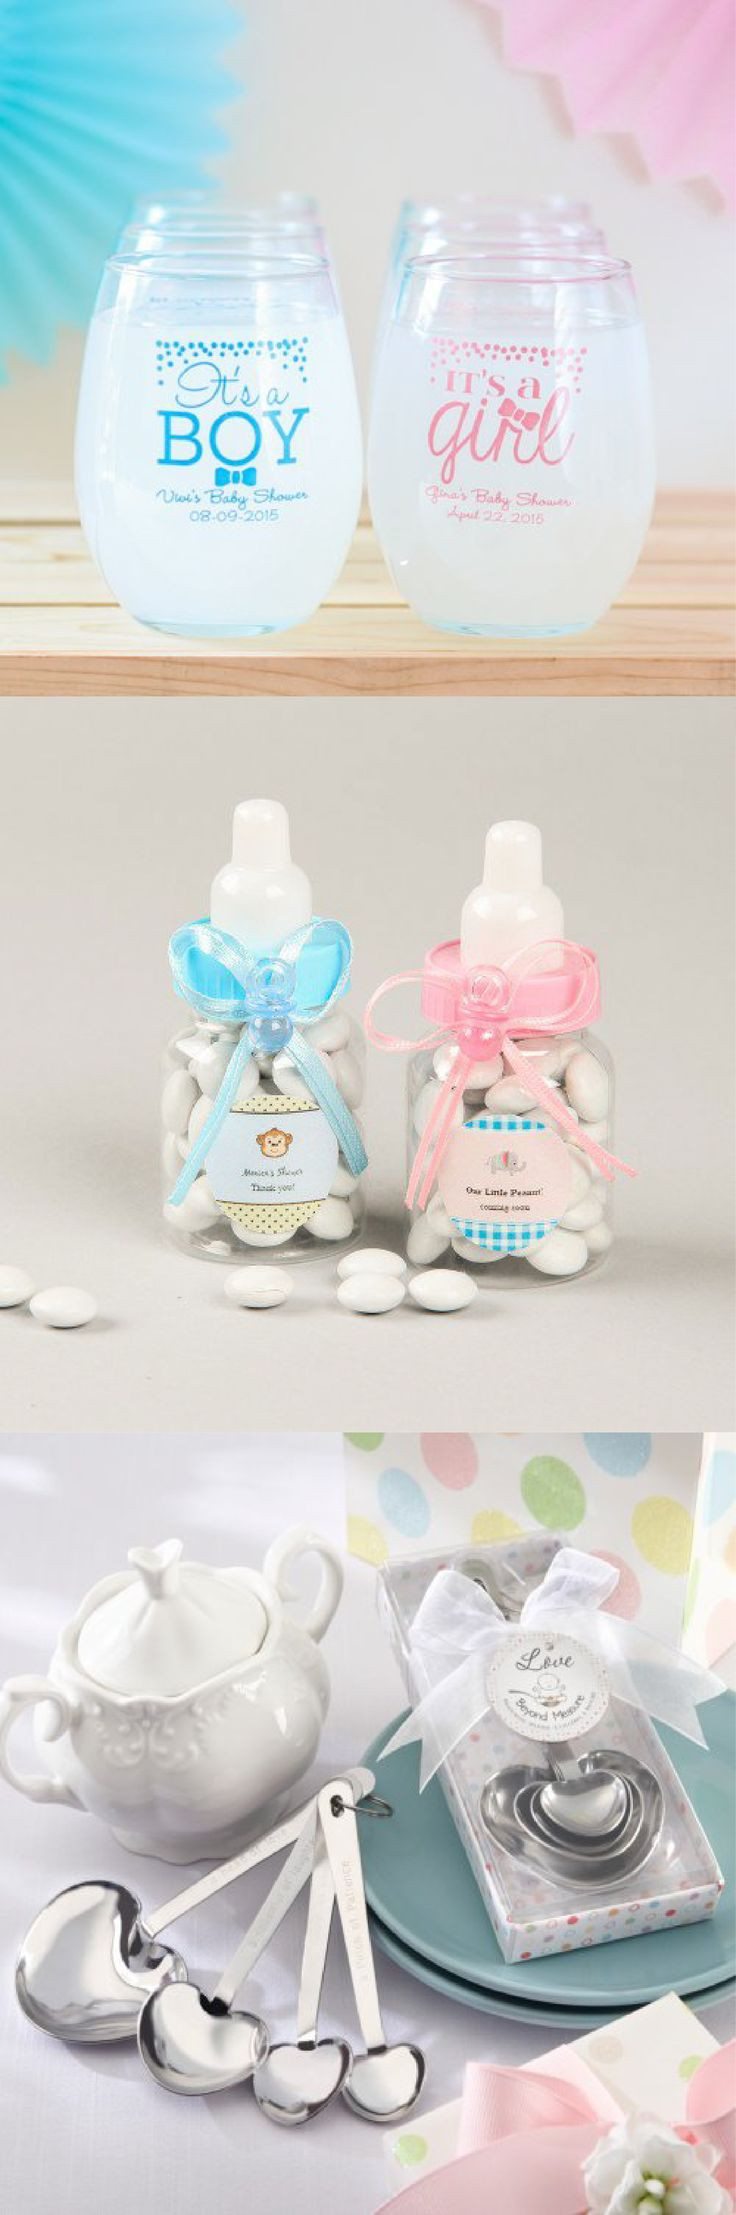 Baby Shower Guest Gifts
 Thank your guests with the perfect baby shower favors